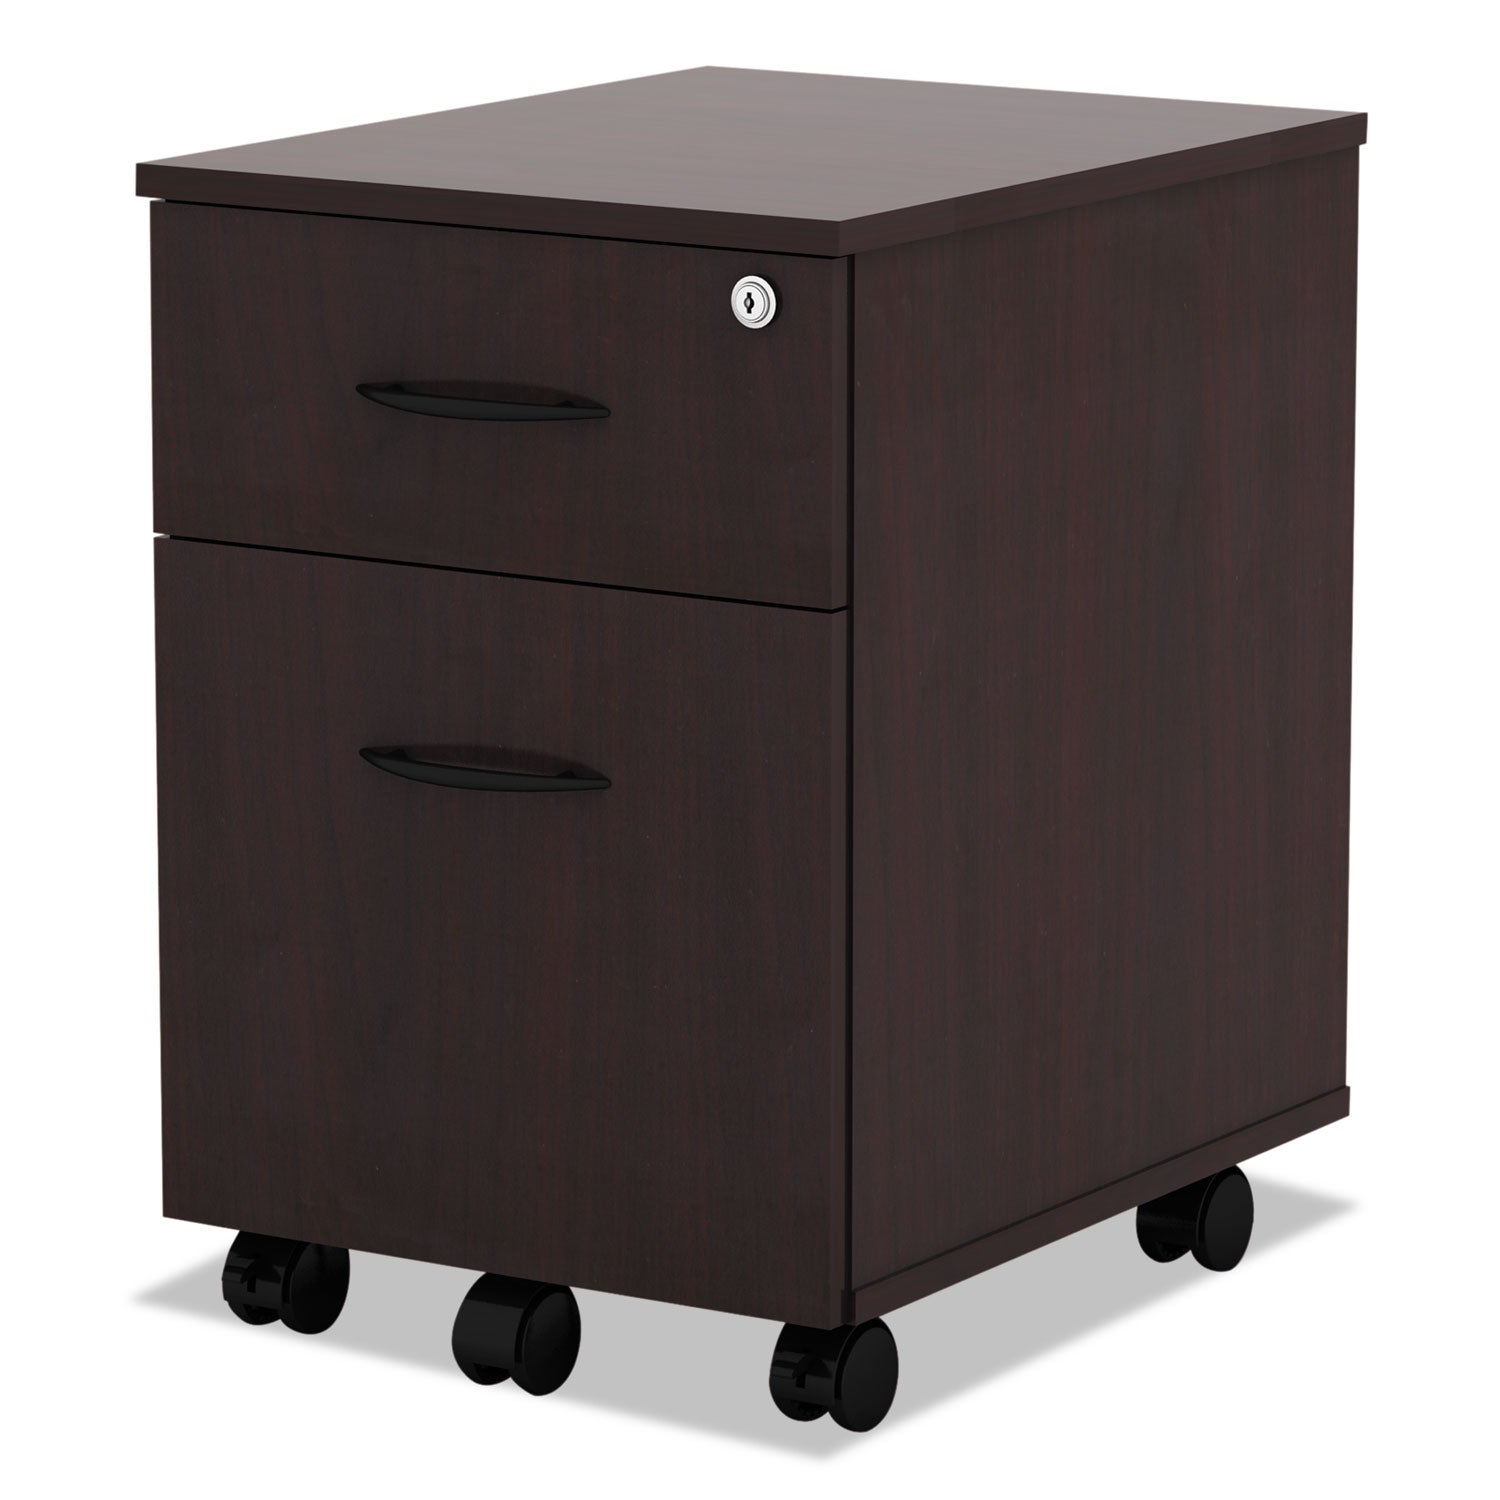 alera-valencia-series-mobile-pedestal-left-or-right-2-drawers-box-file-legal-letter-mahogany-1588-x-1913-x-2288_alevabfmy - 3